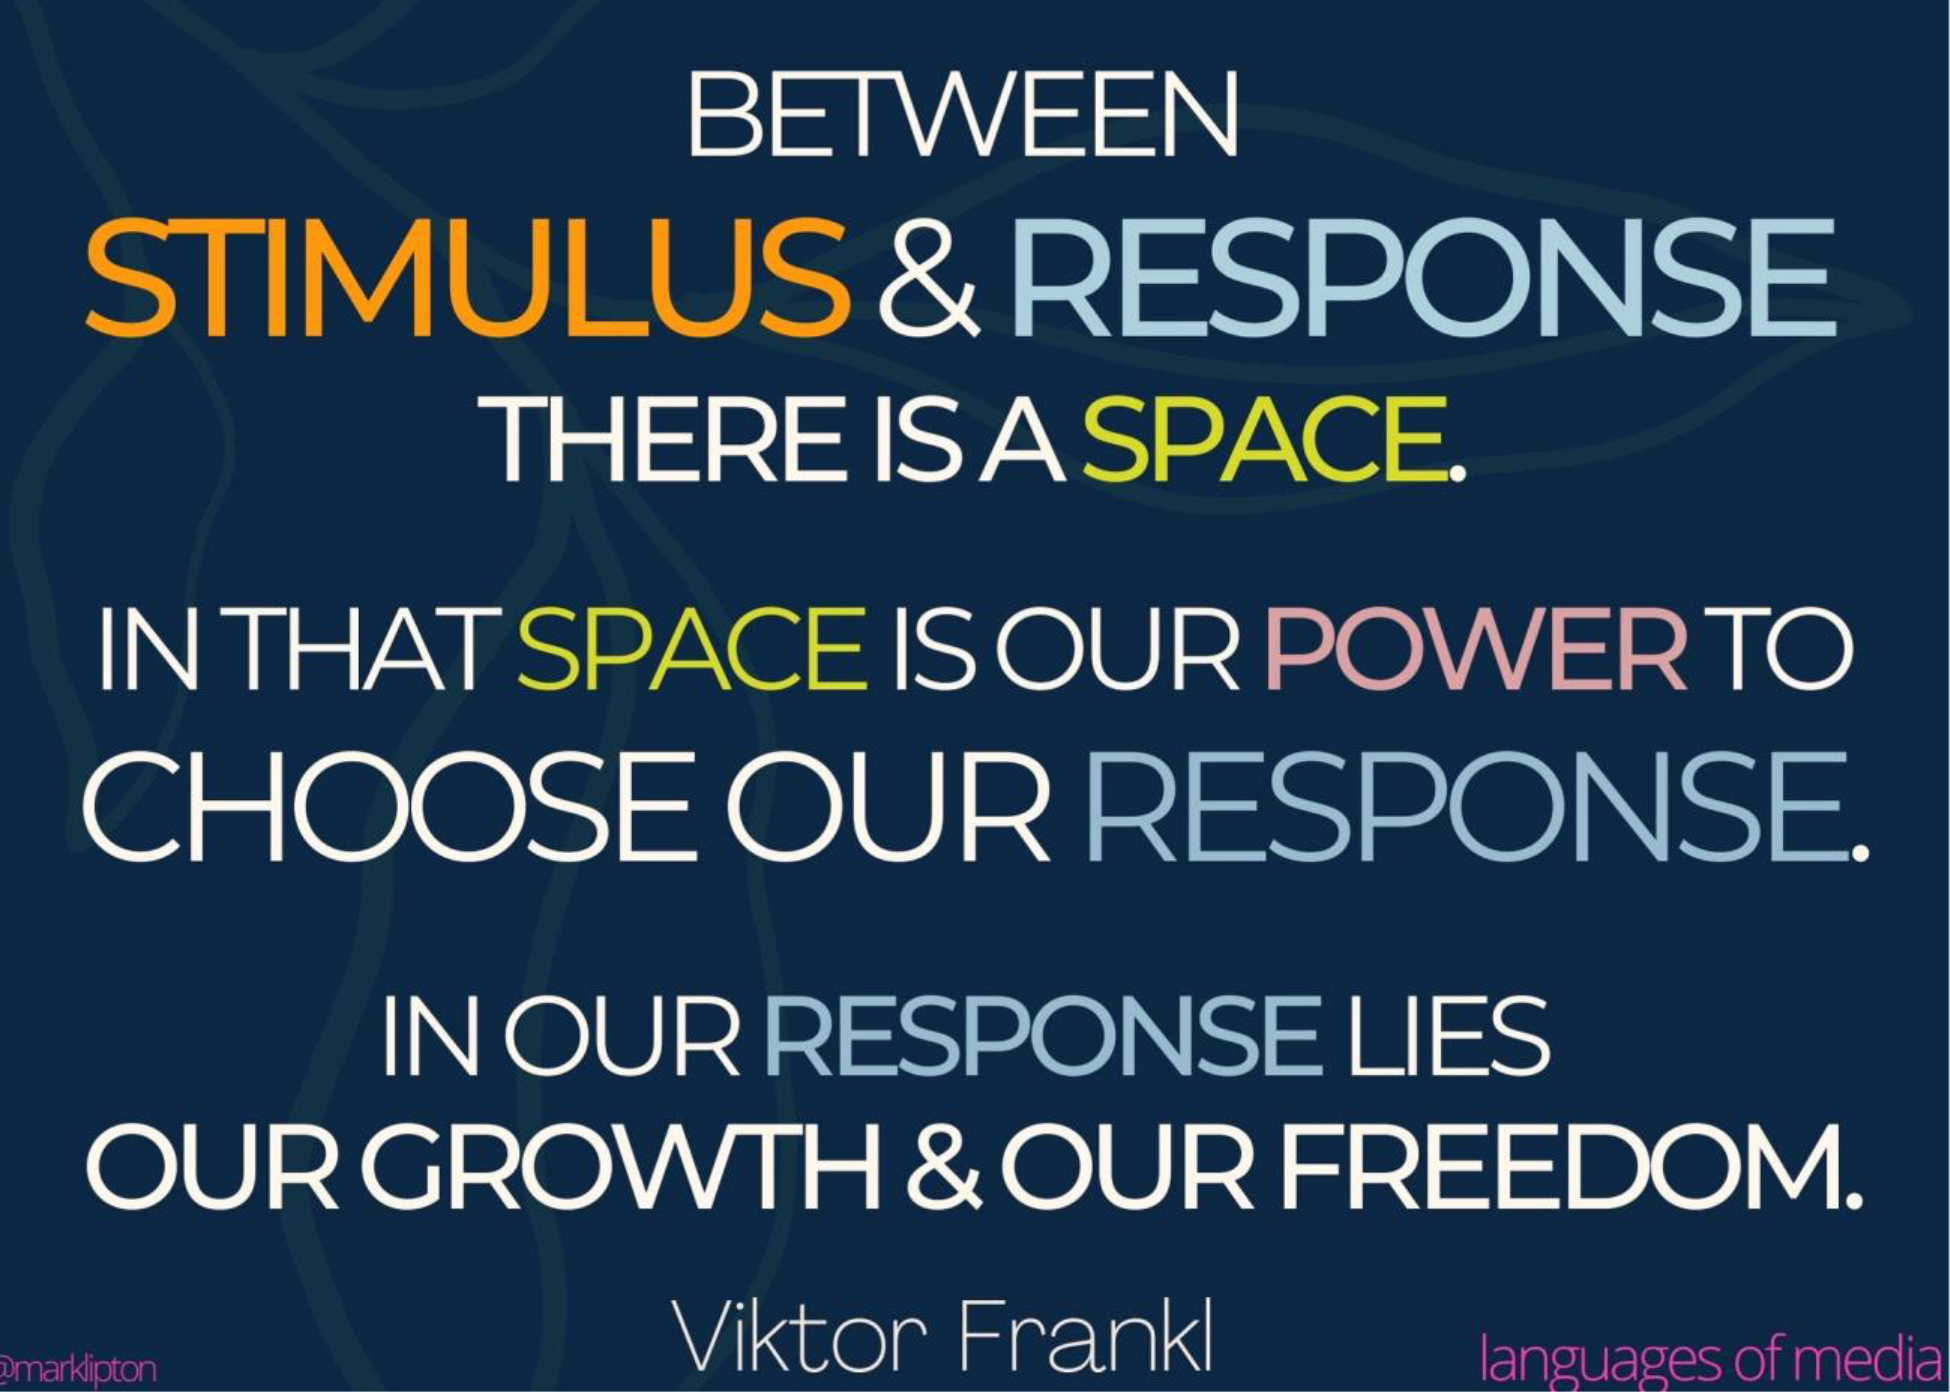 inage: Between stimulus & response there is a space. In that space is our power to choose our response. In our response lies our growth & our freedom. Viktor Frank